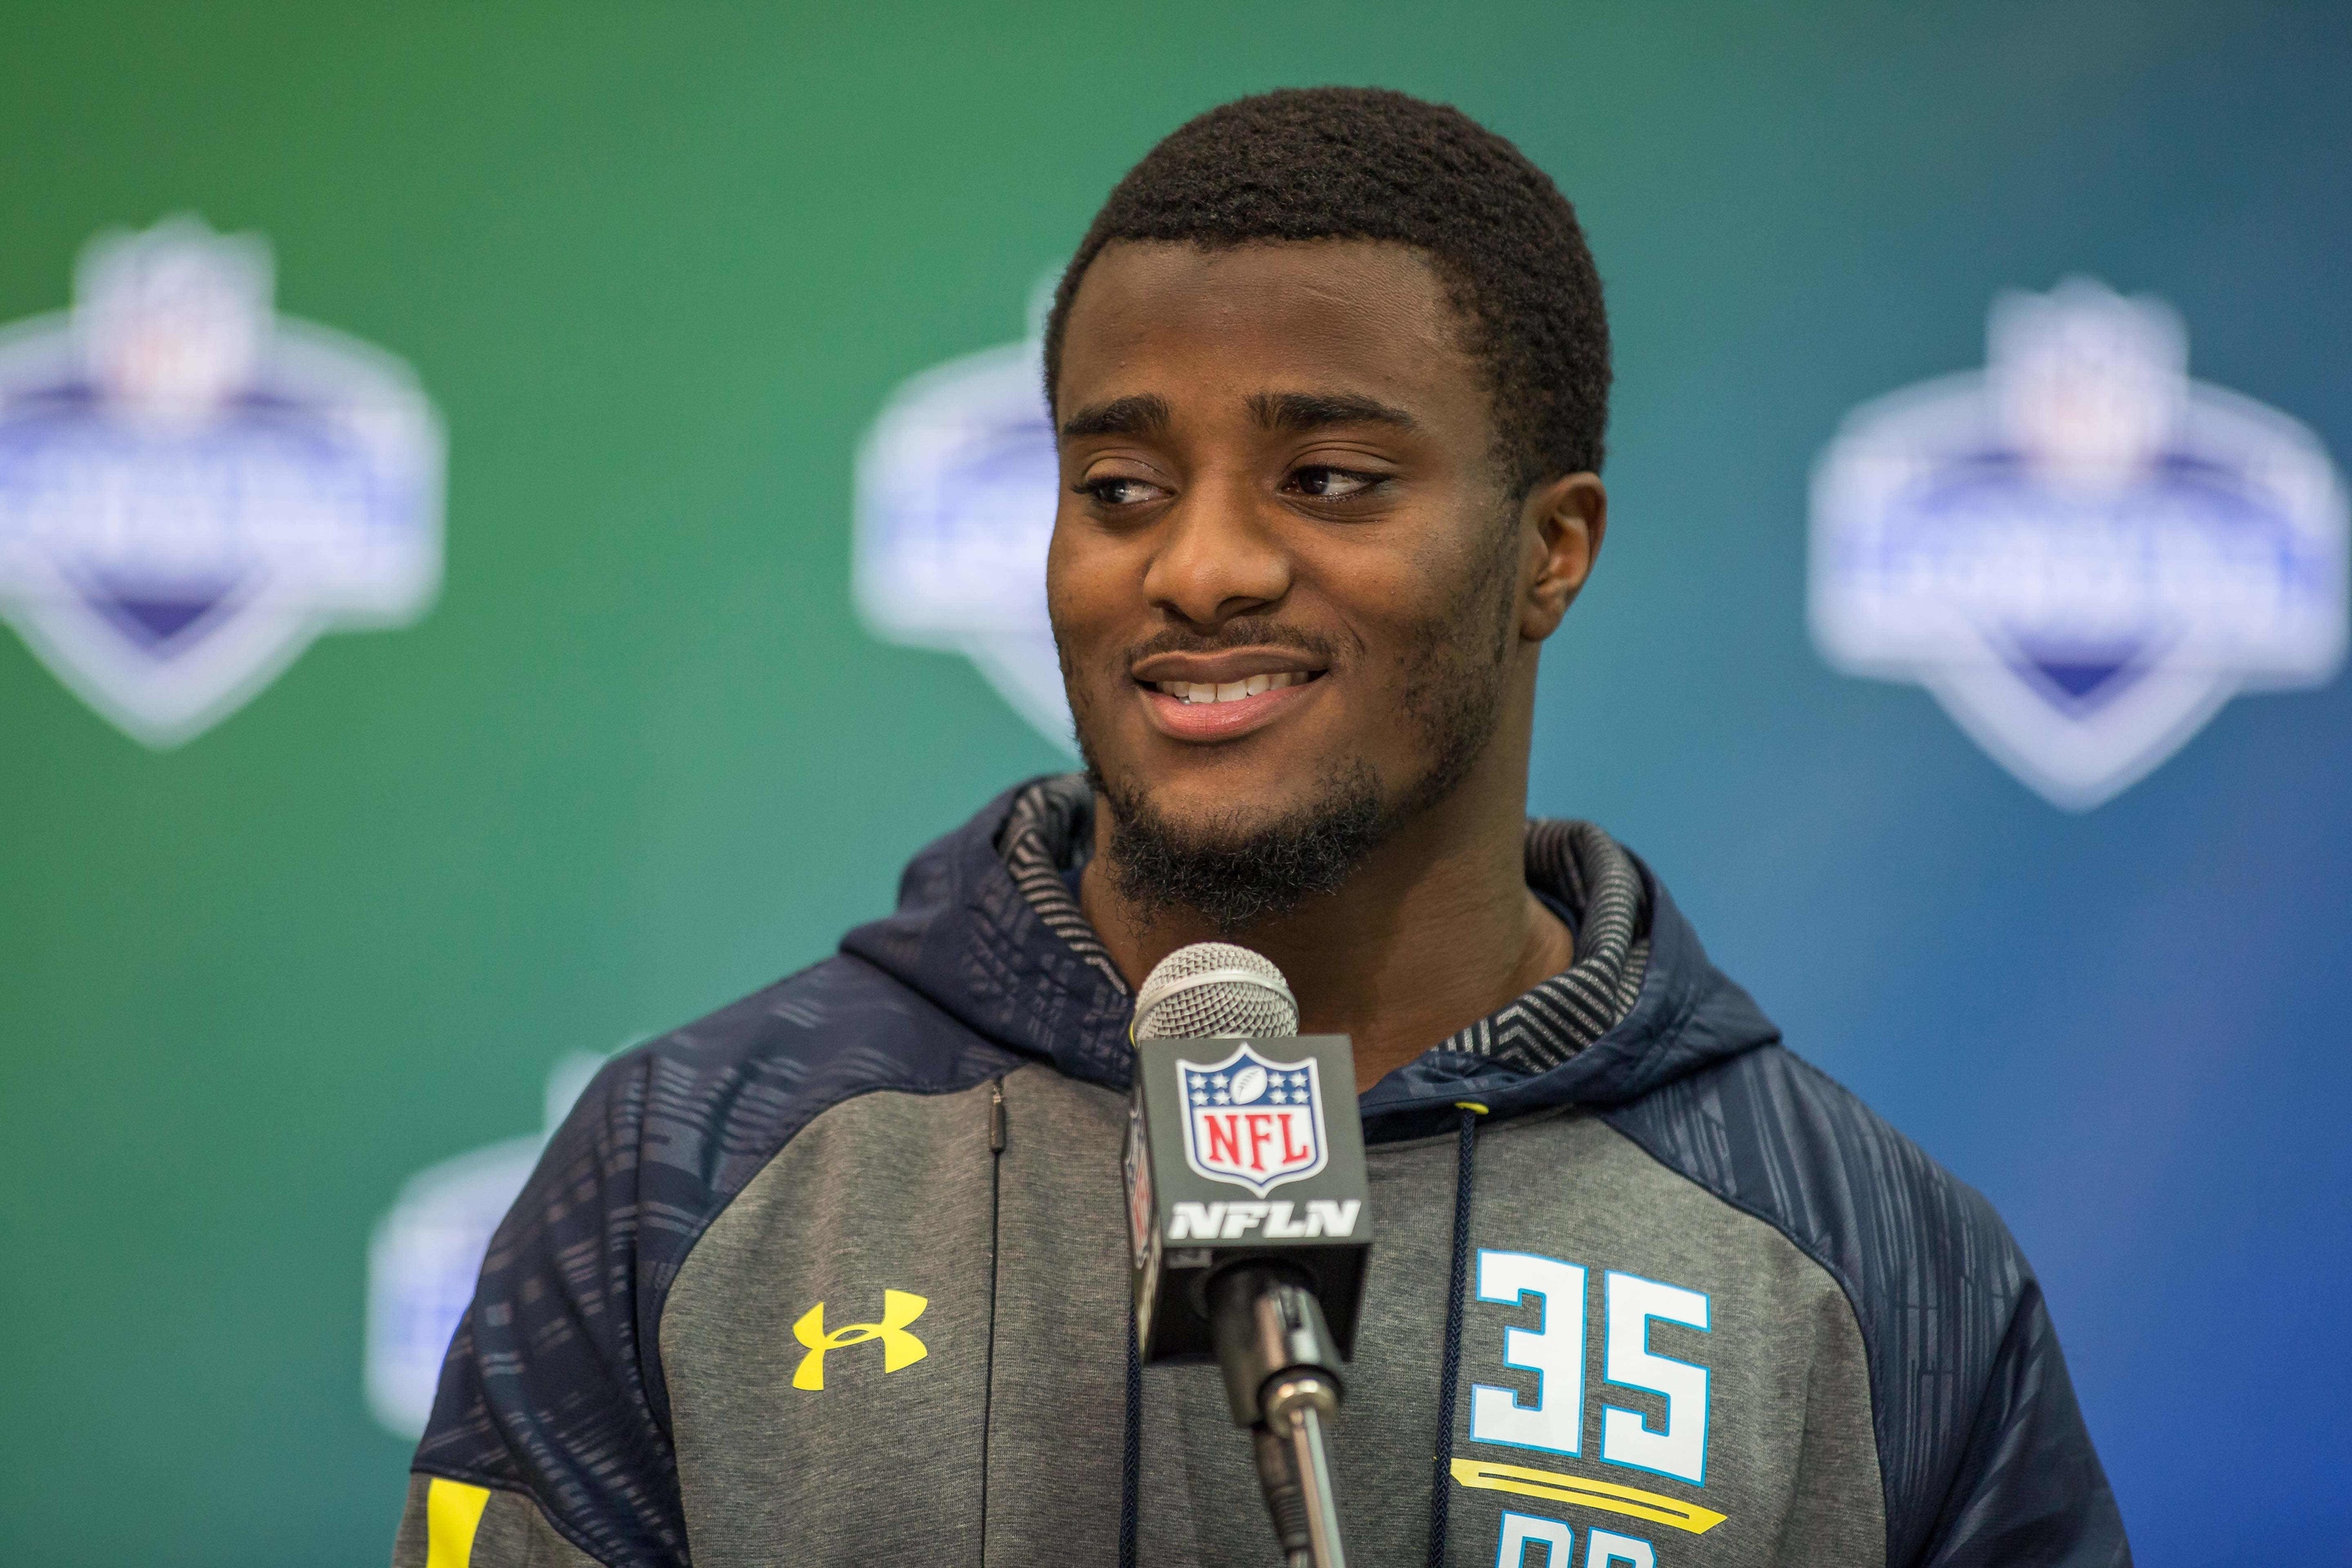 Mar 5, 2017; Indianapolis, IN, USA; Michigan defensive back Jourdan Lewis speaks to the media during the 2017 combine at Indiana Convention Center. Mandatory Credit: Trevor Ruszkowski-USA TODAY Sports